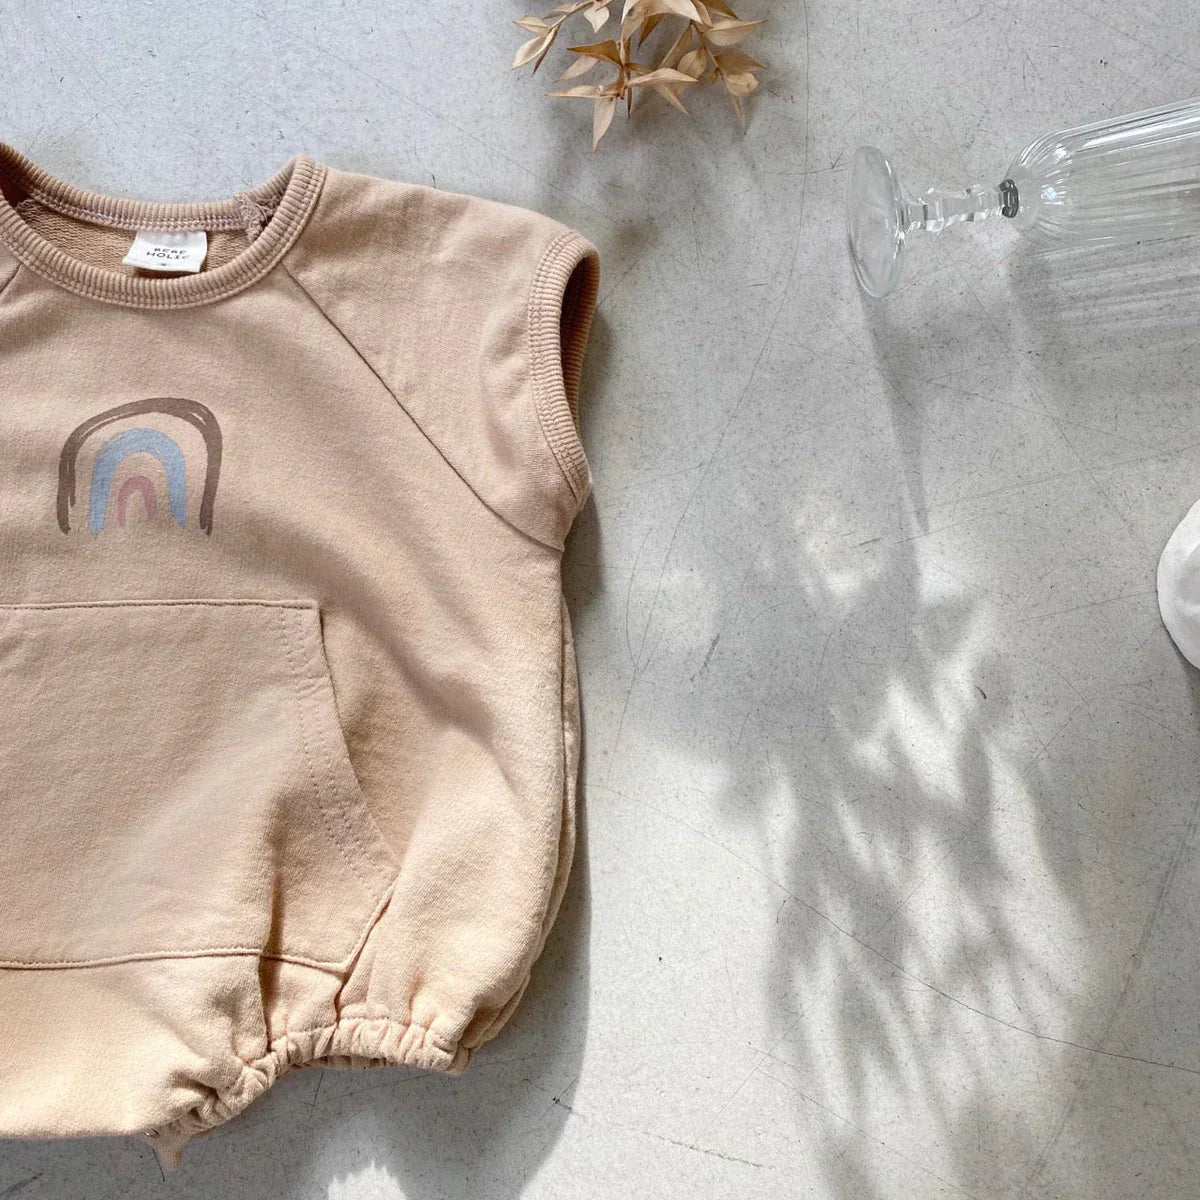 Summer Rainbow Bodysuit find Stylish Fashion for Little People- at Little Foxx Concept Store